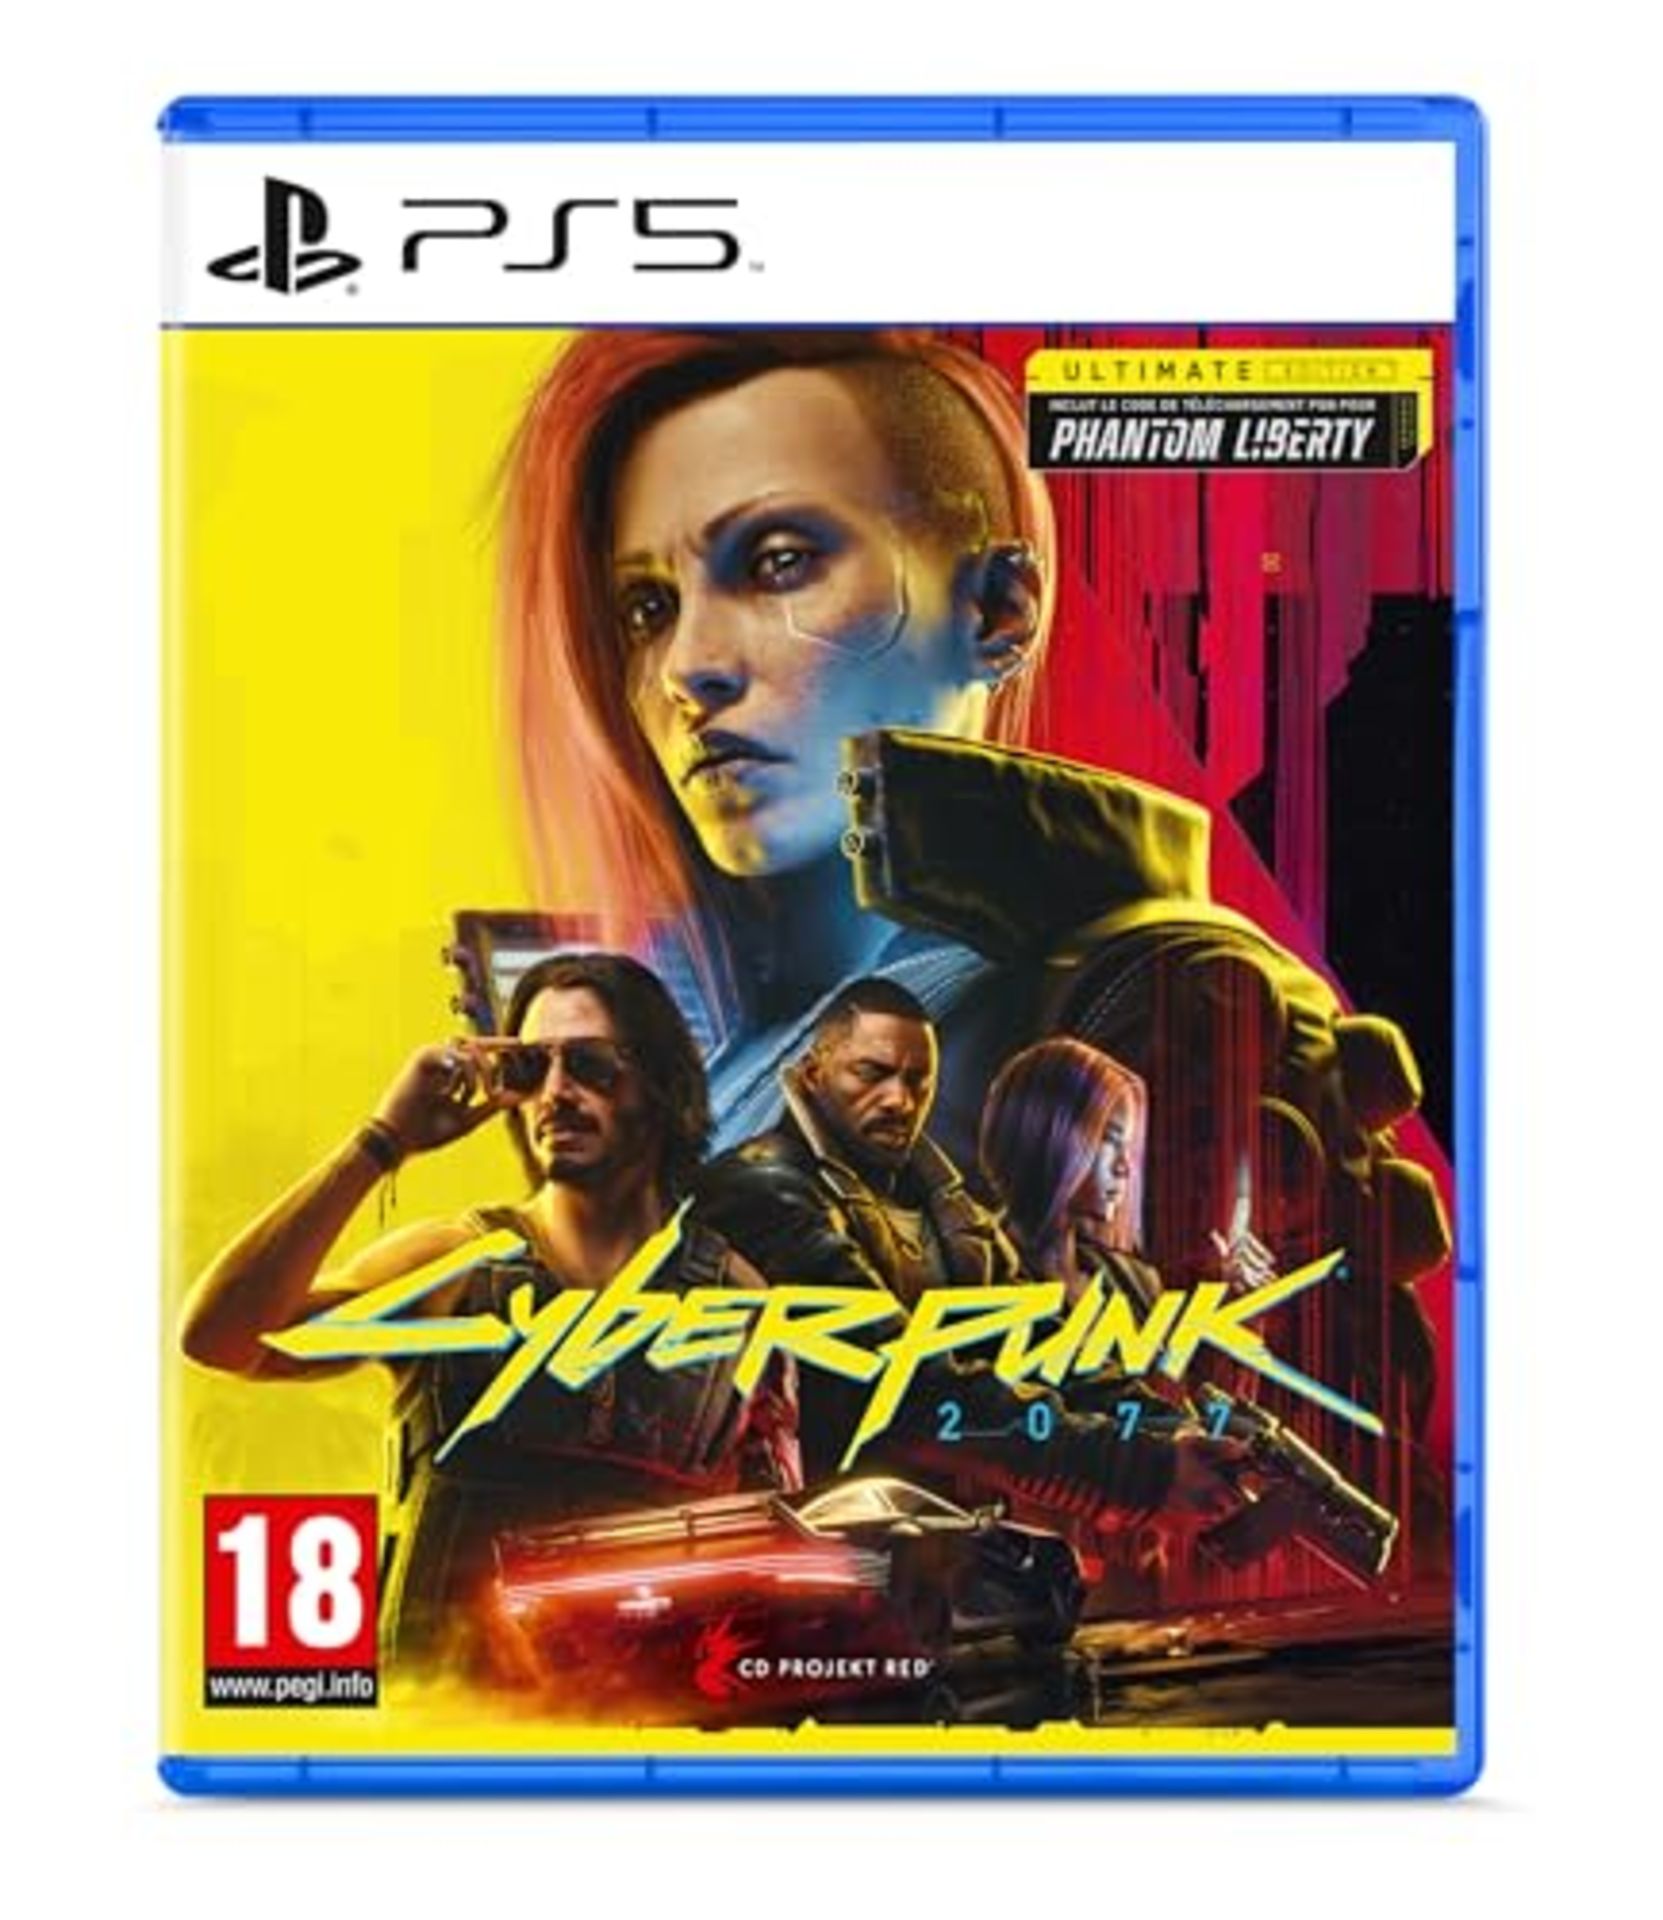 Cyberpunk 2077: Ultimate Edition (PS5) - Image 4 of 6